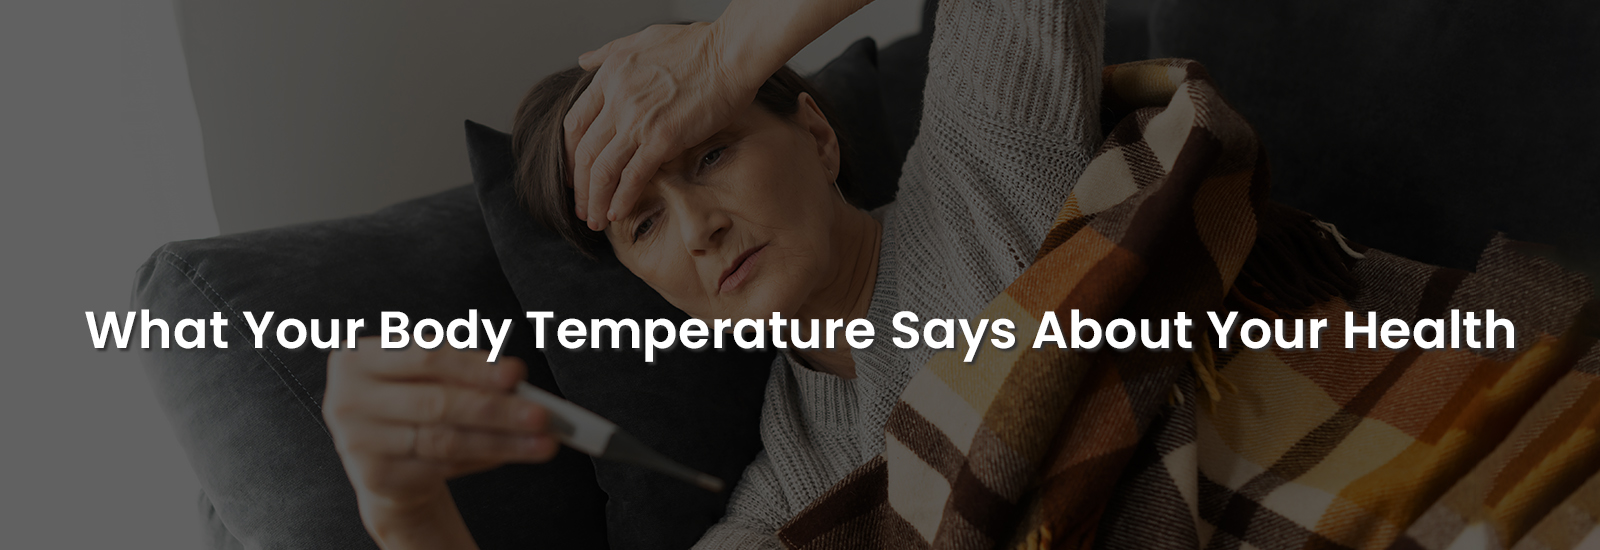 What Your Body Temperature Says About Your Health | Banner Image